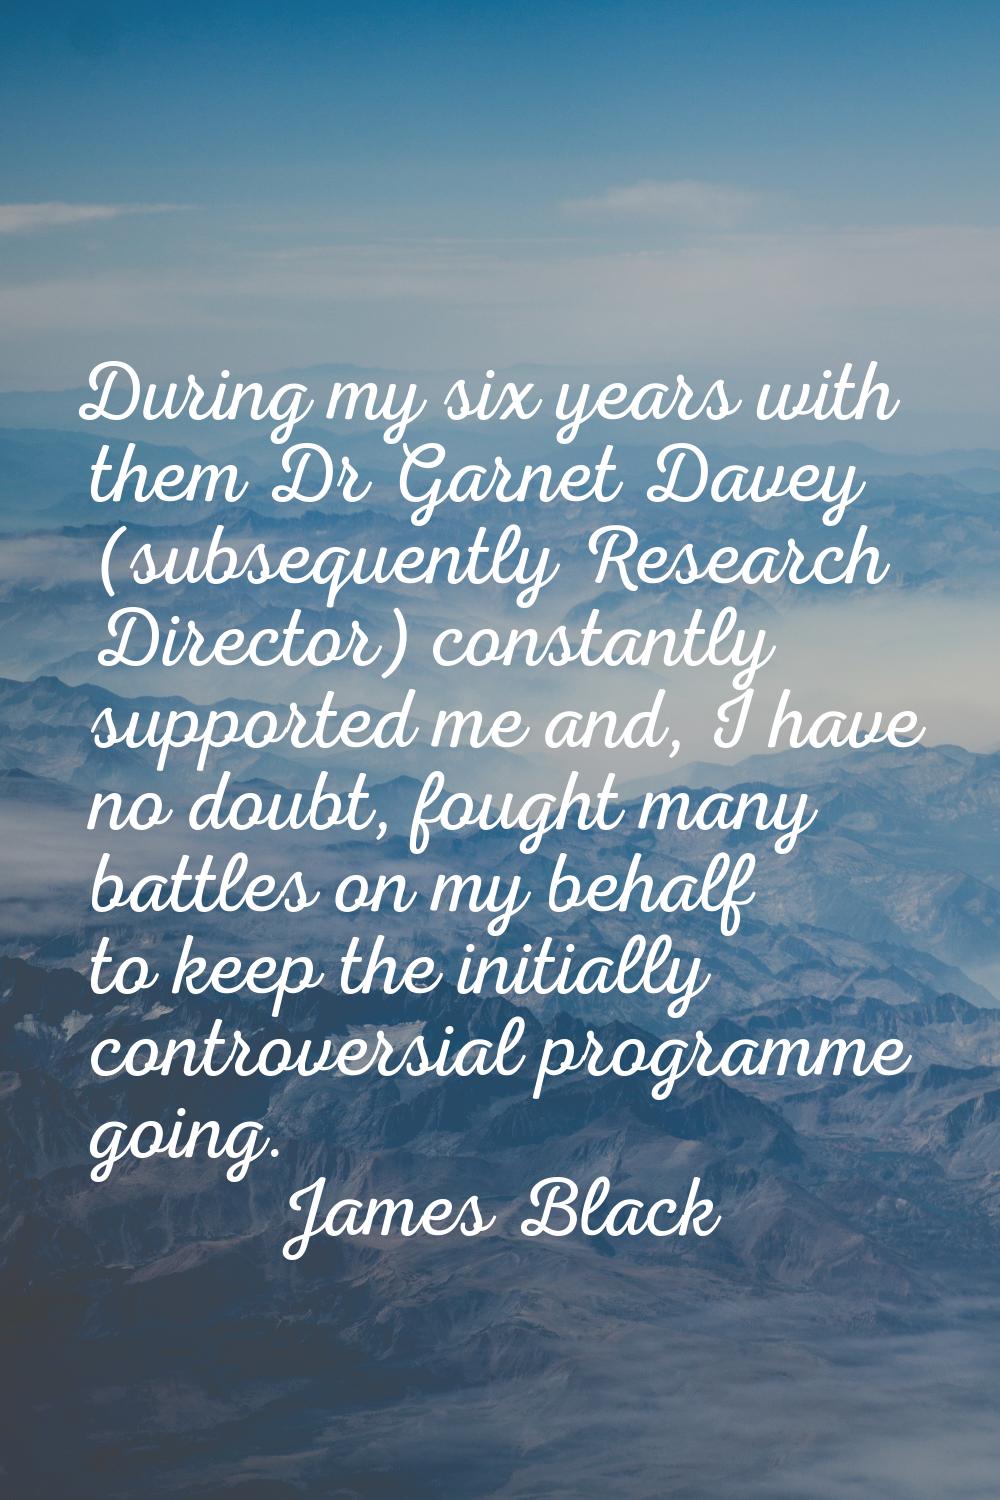 During my six years with them Dr Garnet Davey (subsequently Research Director) constantly supported